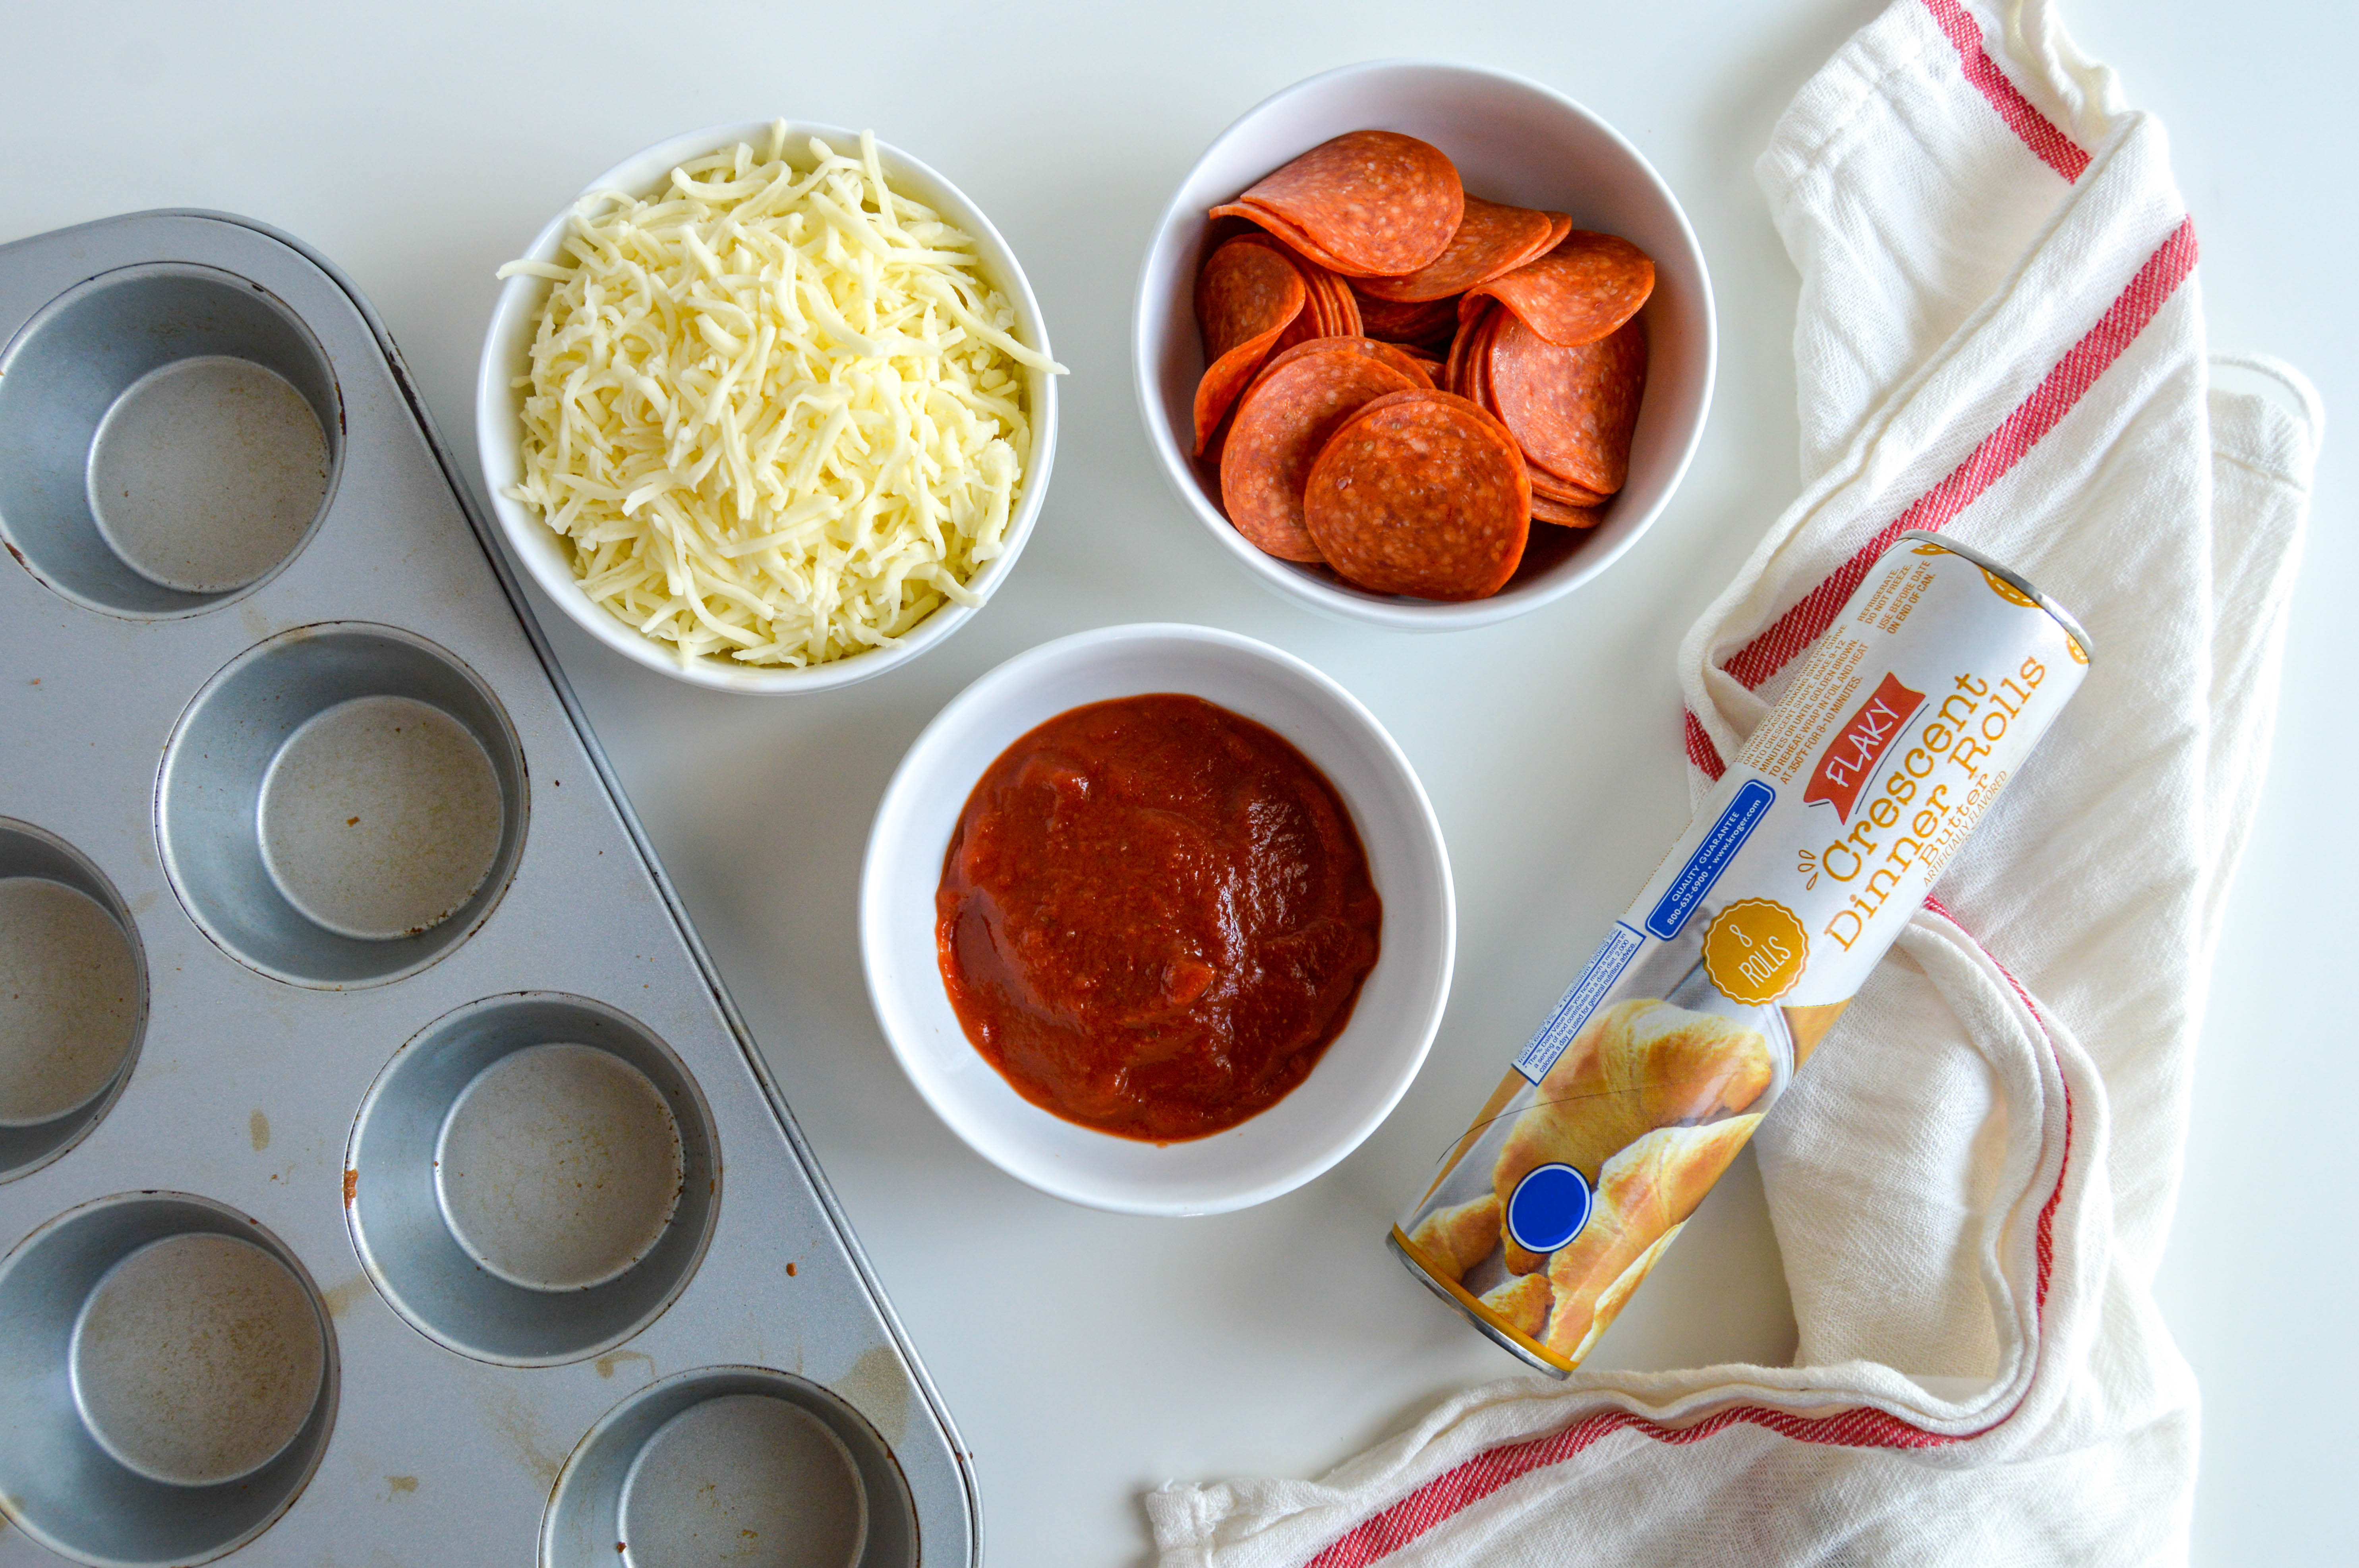 Ingredients for baking pizza muffins.